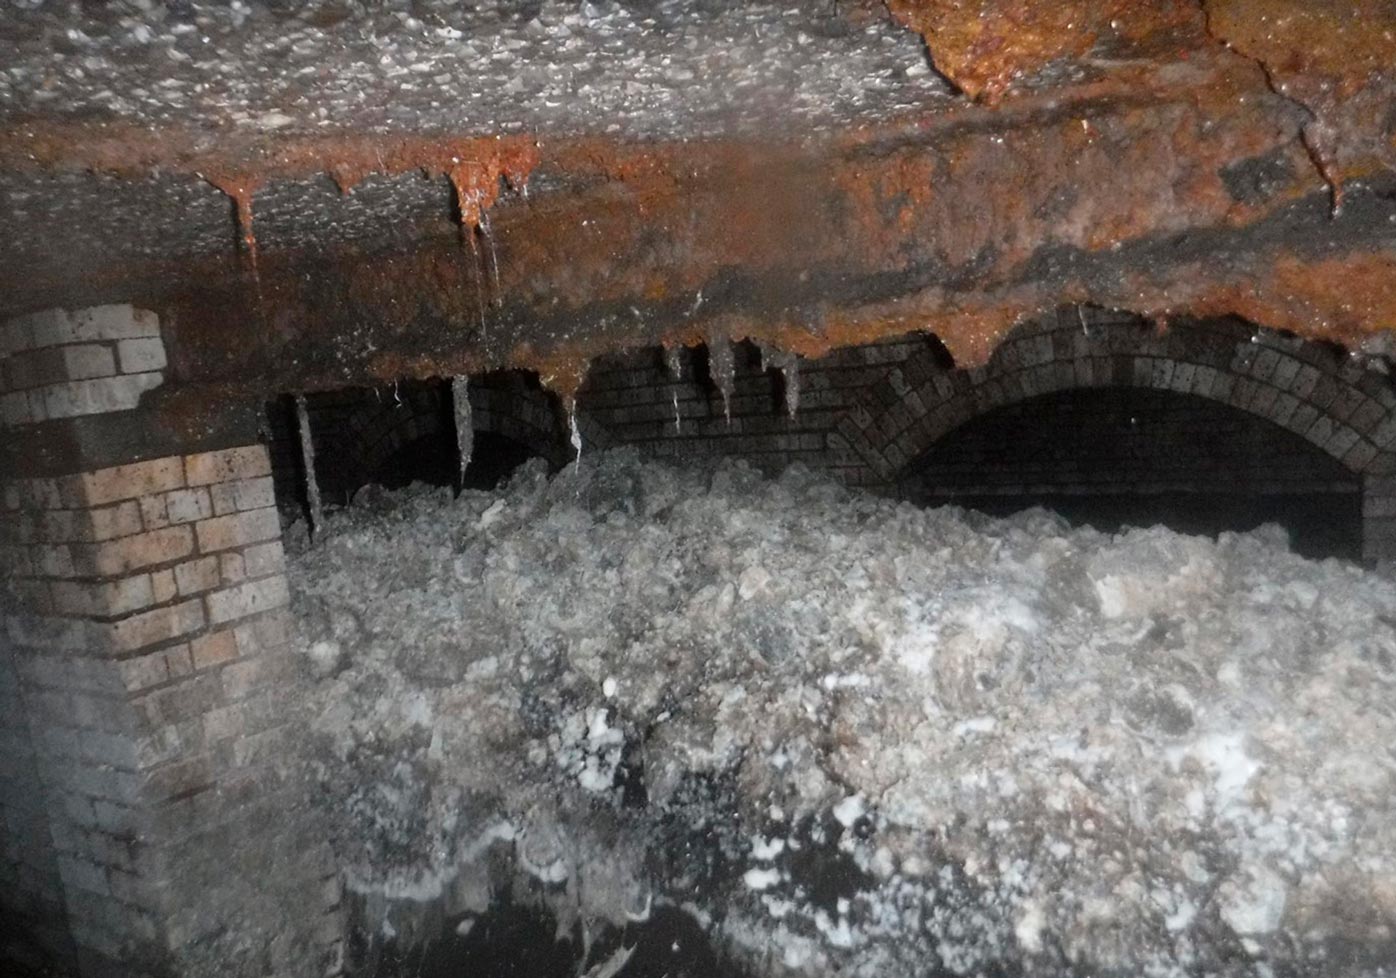 A British official says a giant "fatberg" – a mass of hardened fat, oil and baby wipes measuring 64 metres long – has been found blocking a sewer in southwestern England.